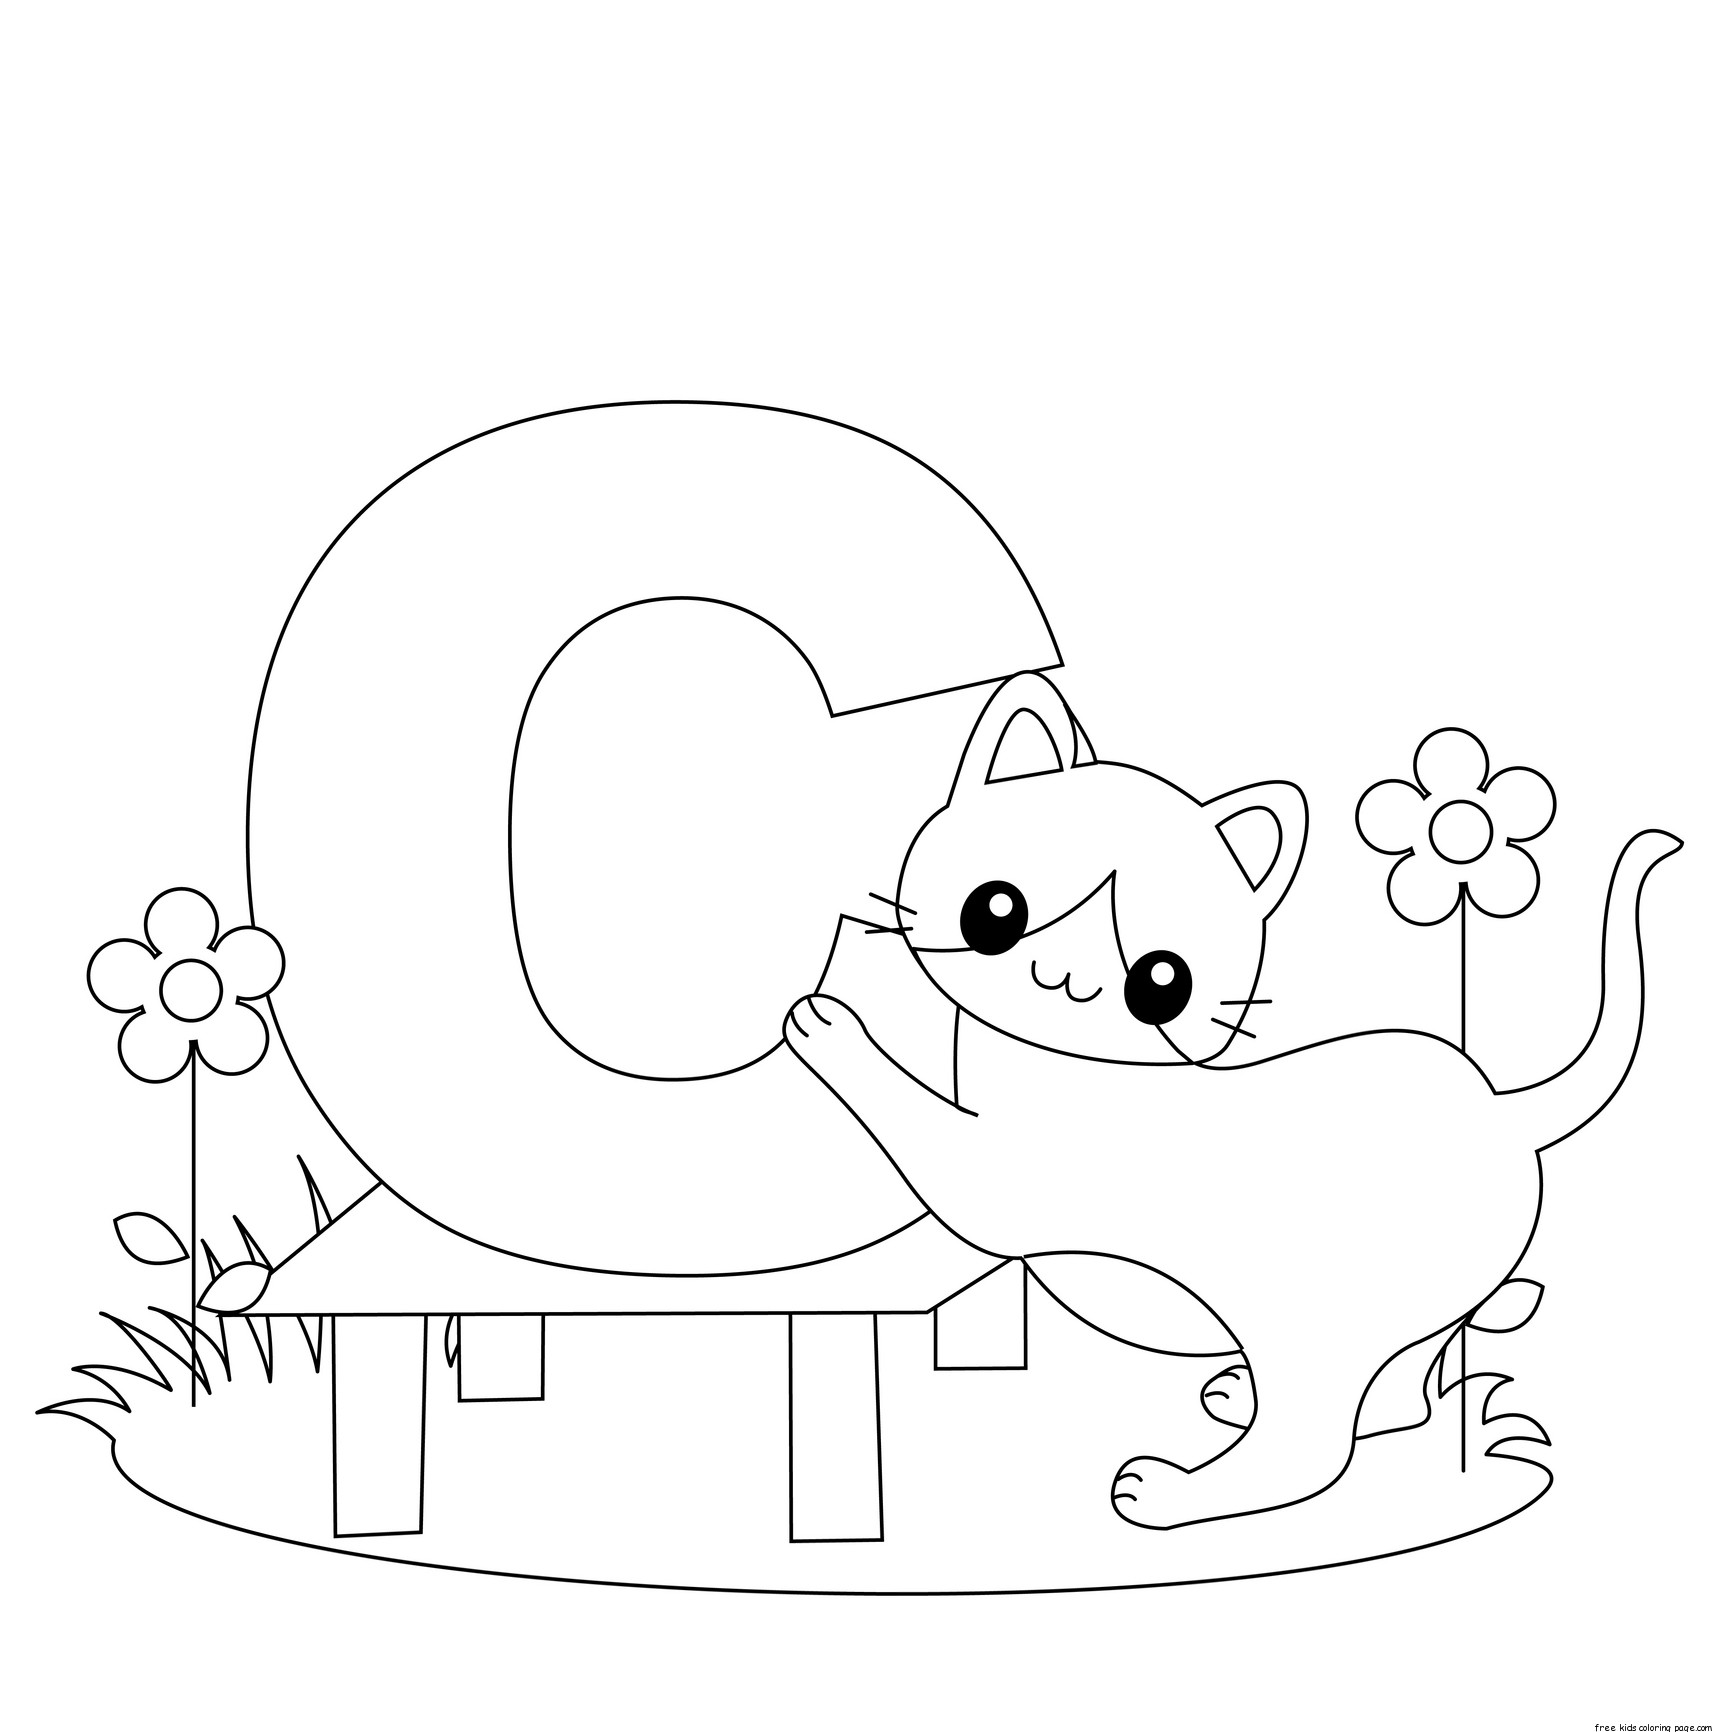 c coloring pages - photo #37